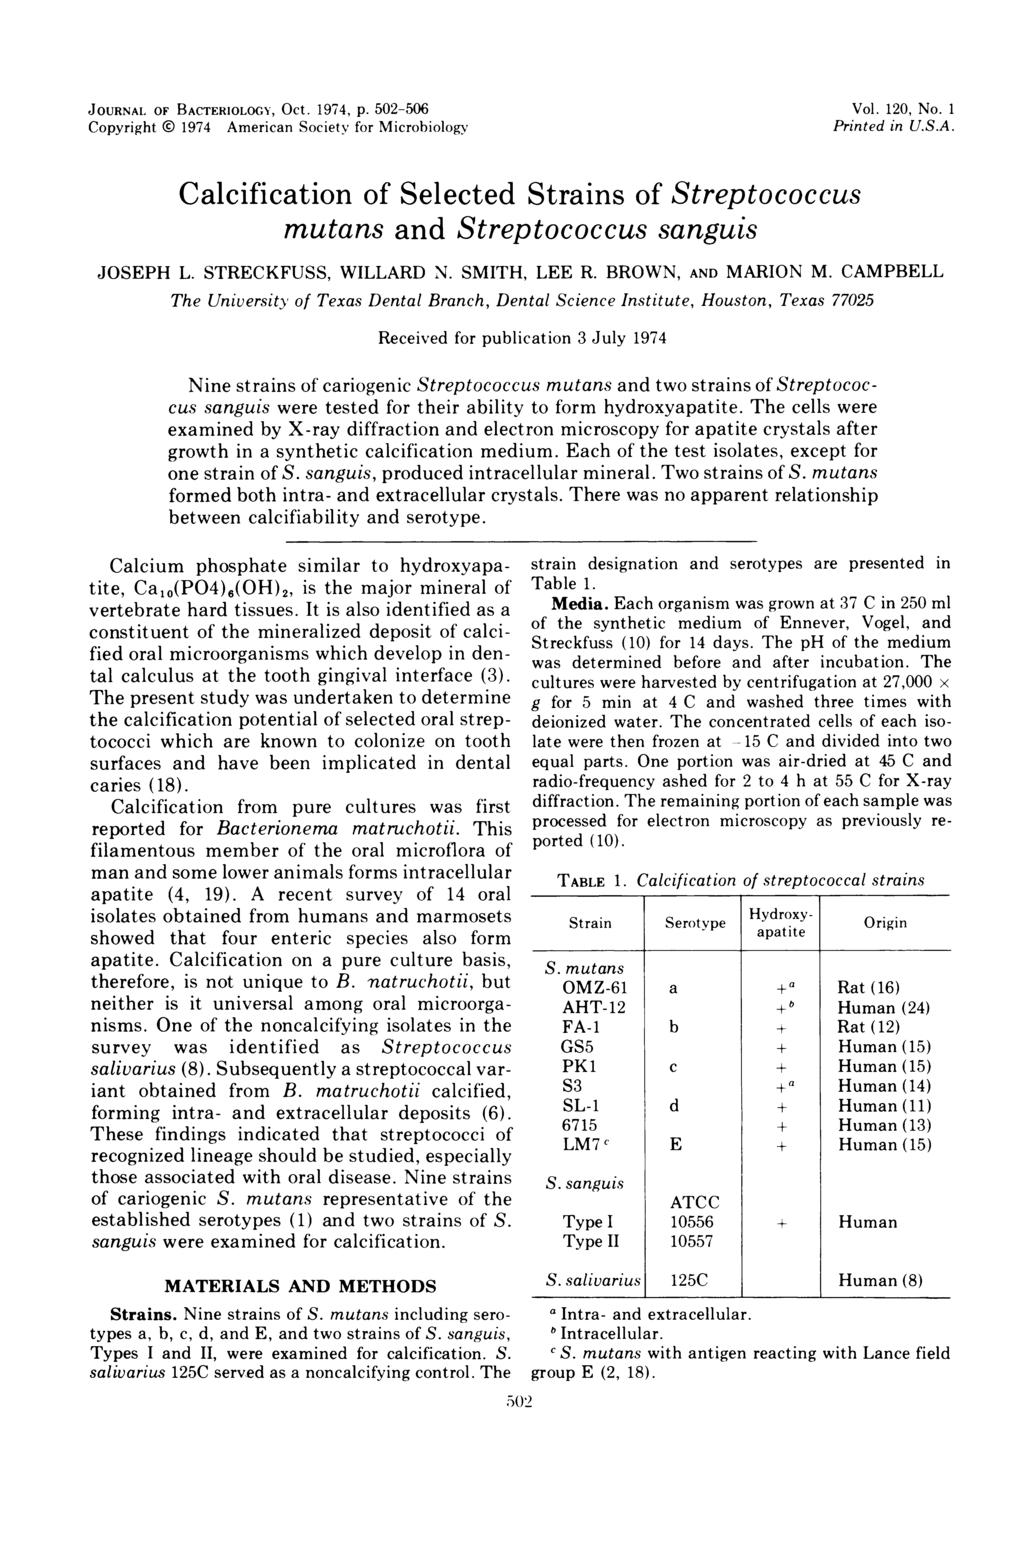 JOURNAL OF BACTEROLOGY, OCt. 1974, p. 502-506 Copyrght ( 1974 Amercan Socety for Mcrobology Vol. 120, No. 1 Prnted n U.S.A. Calcfcaton of Selected Strans of Streptococcus mutans and Streptococcus sangus JOSEPH L.